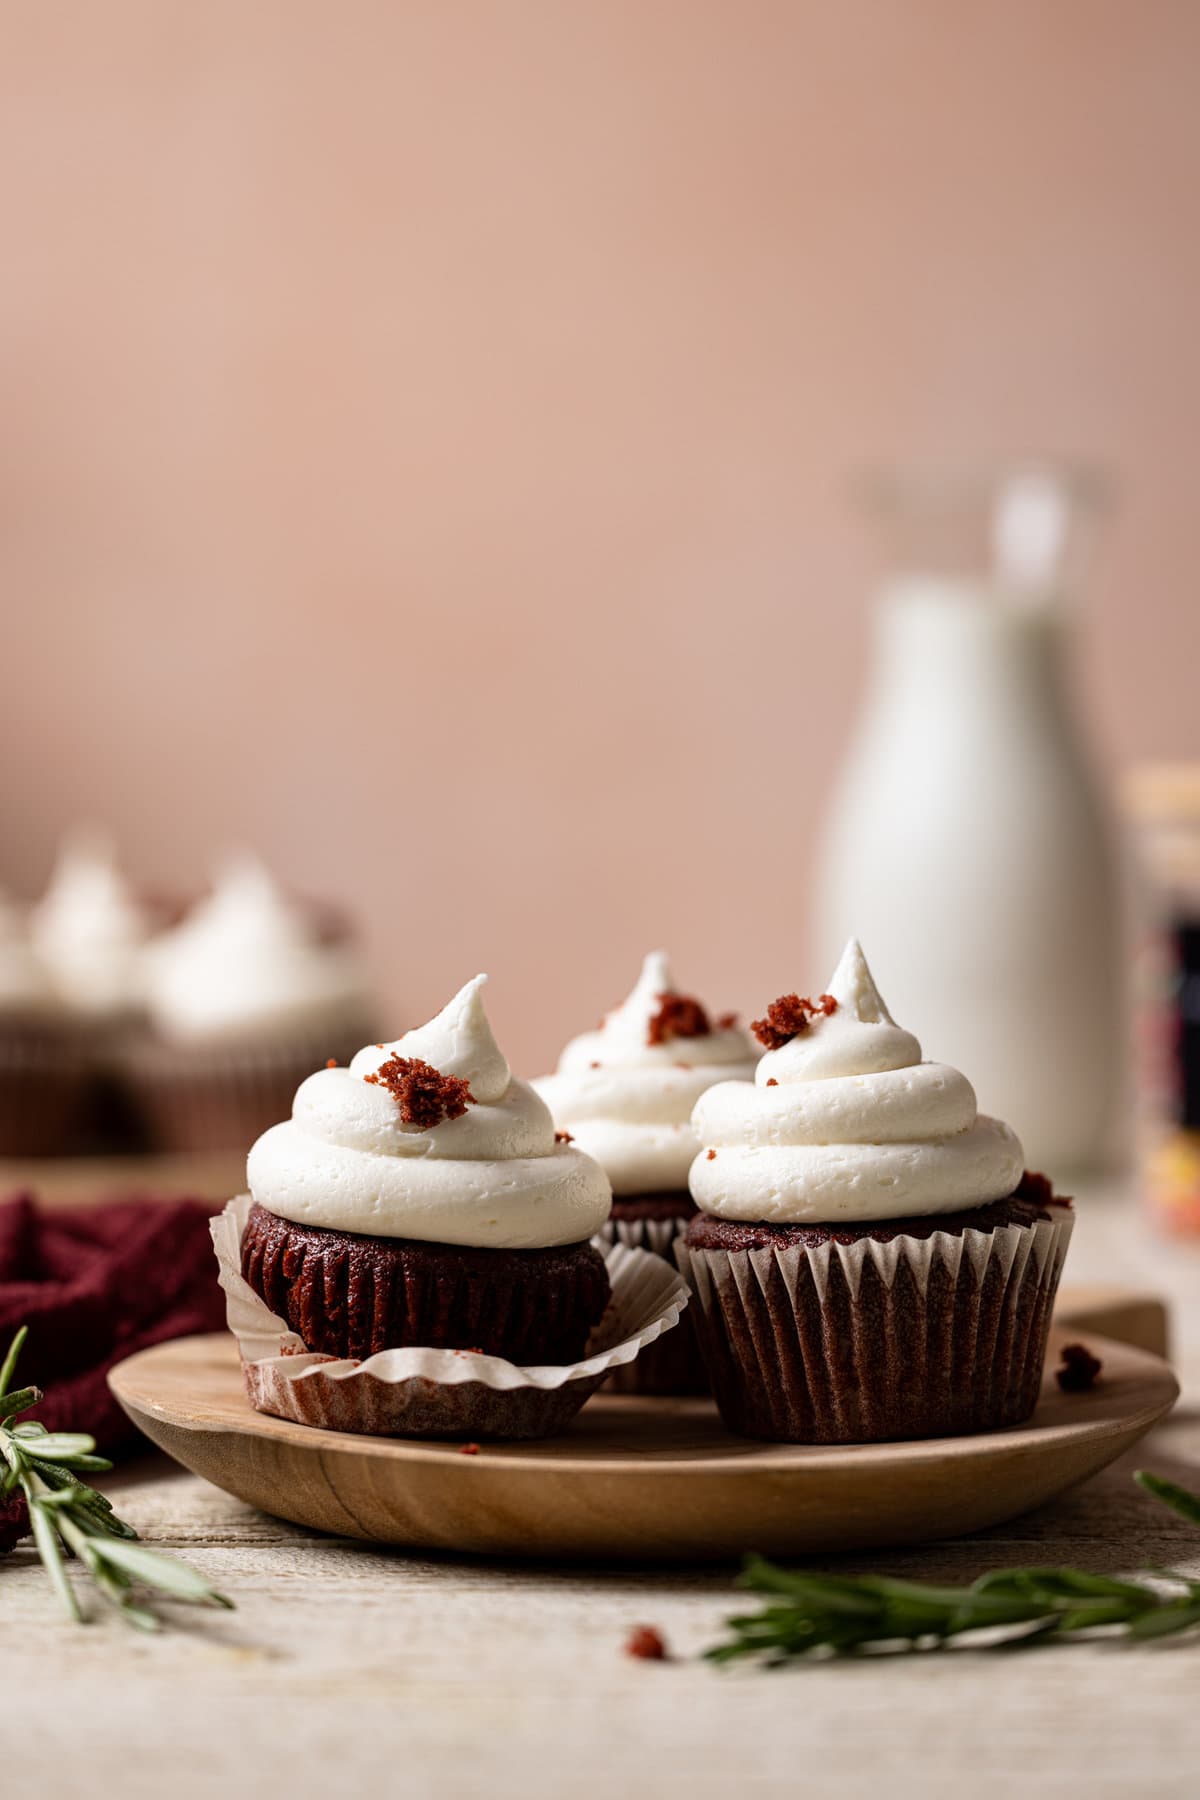 Three Vegan Red Velvet Cupcakes with Bourbon Vanilla Buttercream on a small, wooden plate.